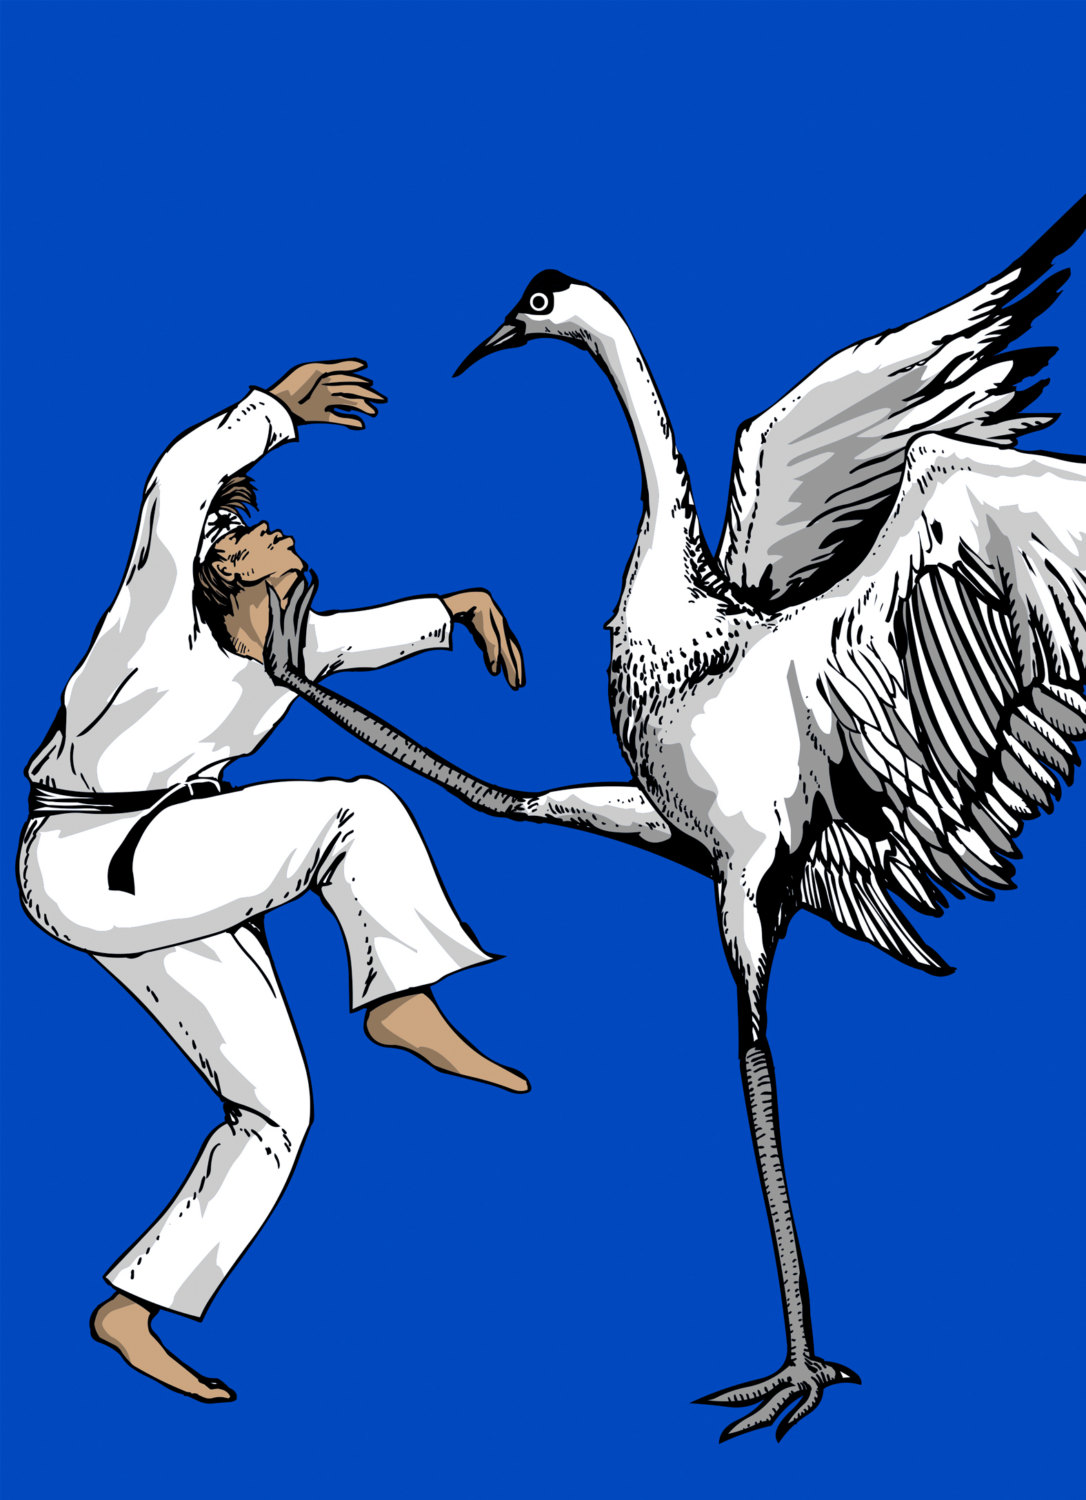 Karate Crane 3-pack, Stationary Cards, Folded Cards, Blank Cards, Greeting Cards, Matching Envelopes Included